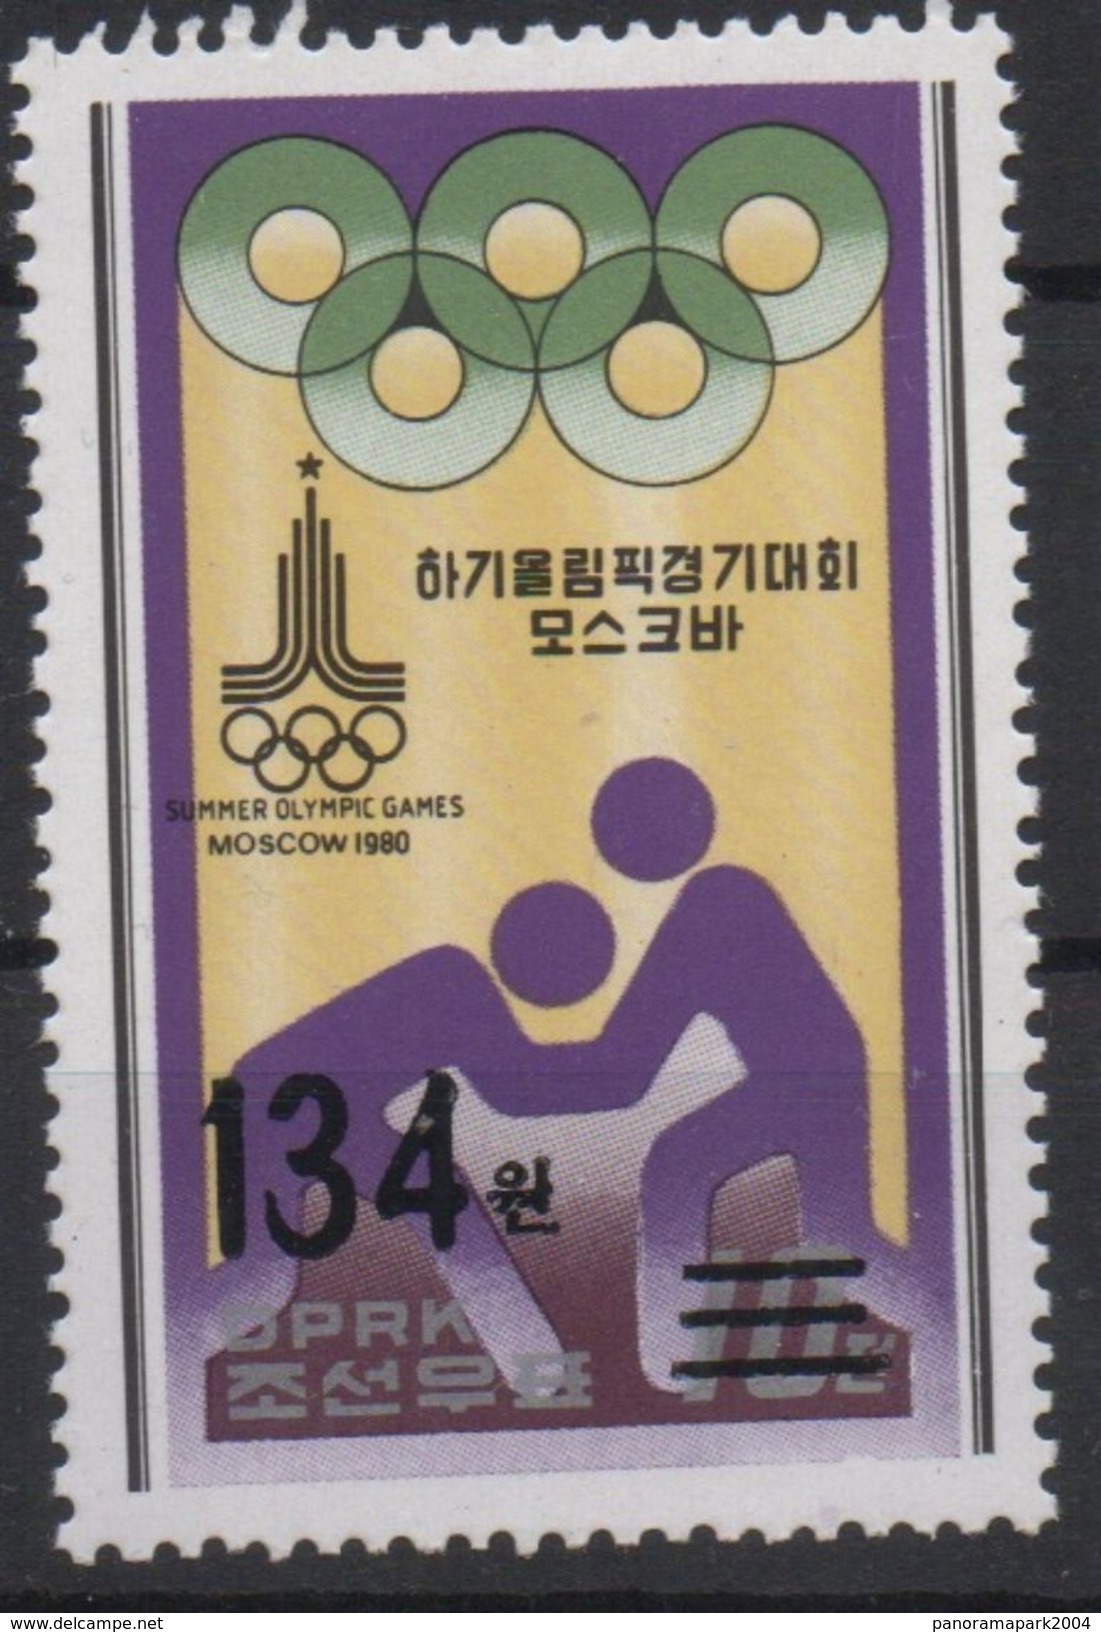 North Korea Corée Du Nord 2006 Mi. 5112 OVERPRINT Olympic Games Jeux Olympiques MOSCOW MOSCOU 1980 MOSKAU Olympia - Sommer 1980: Moskau